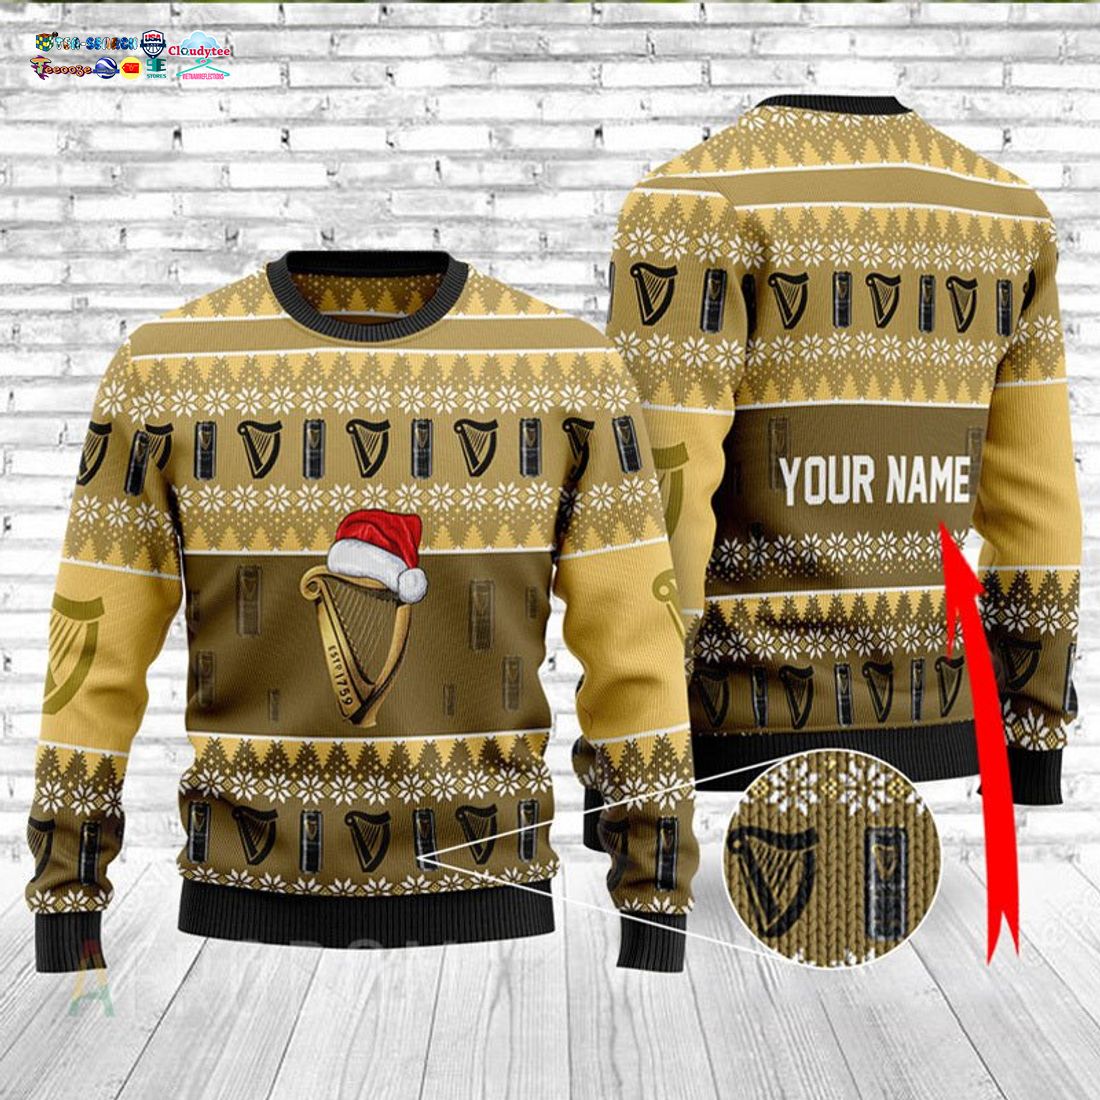 Personalized Name Guinness Ver 2 Ugly Christmas Sweater - Loving, dare I say?